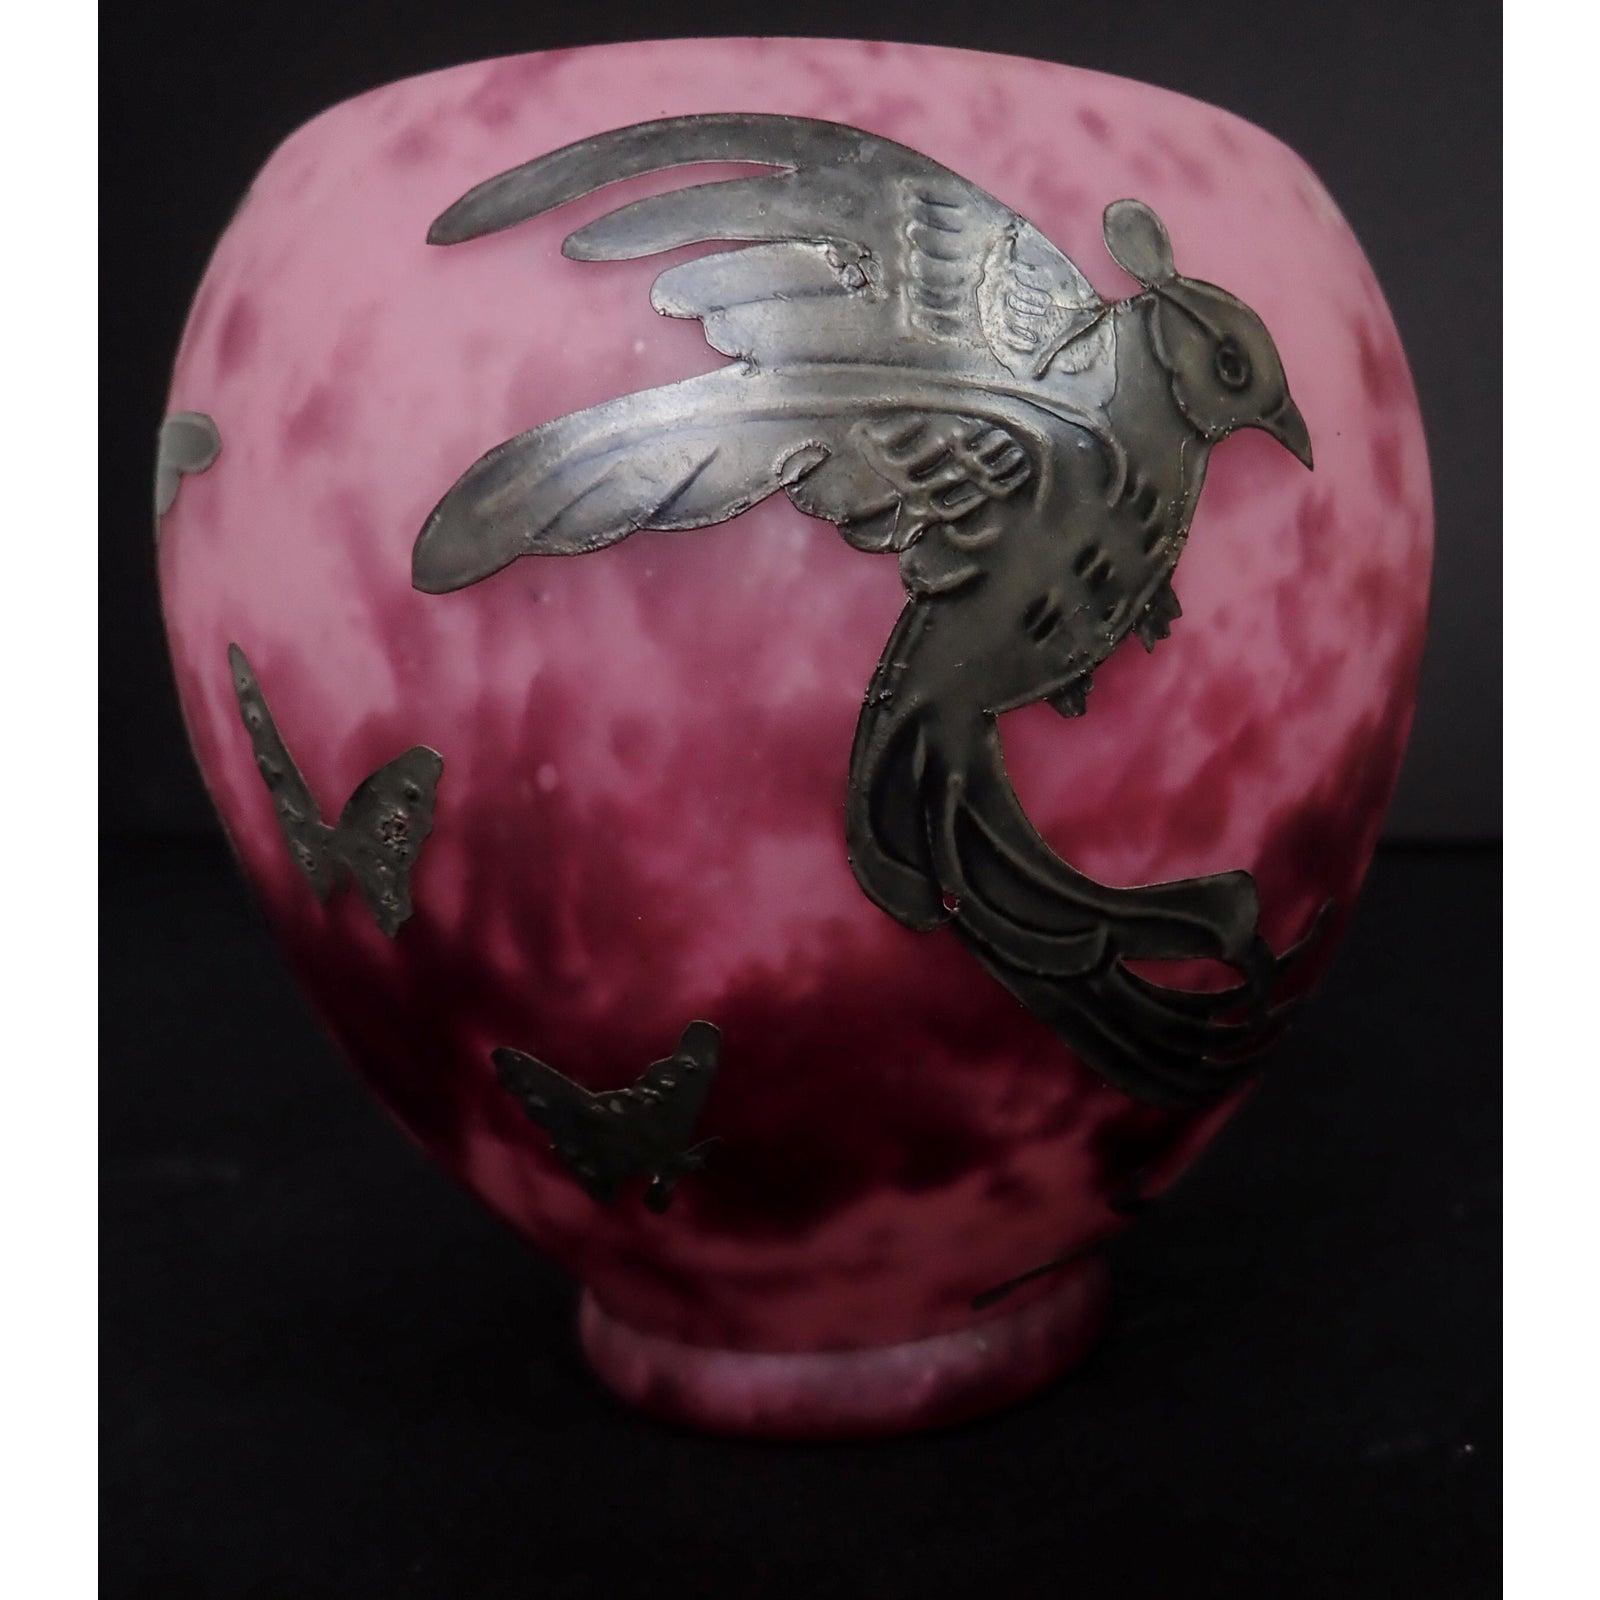 Art Deco mottled purple art glass vase with applied silver overlay birds.
Features silver overlay birds and butterflies.